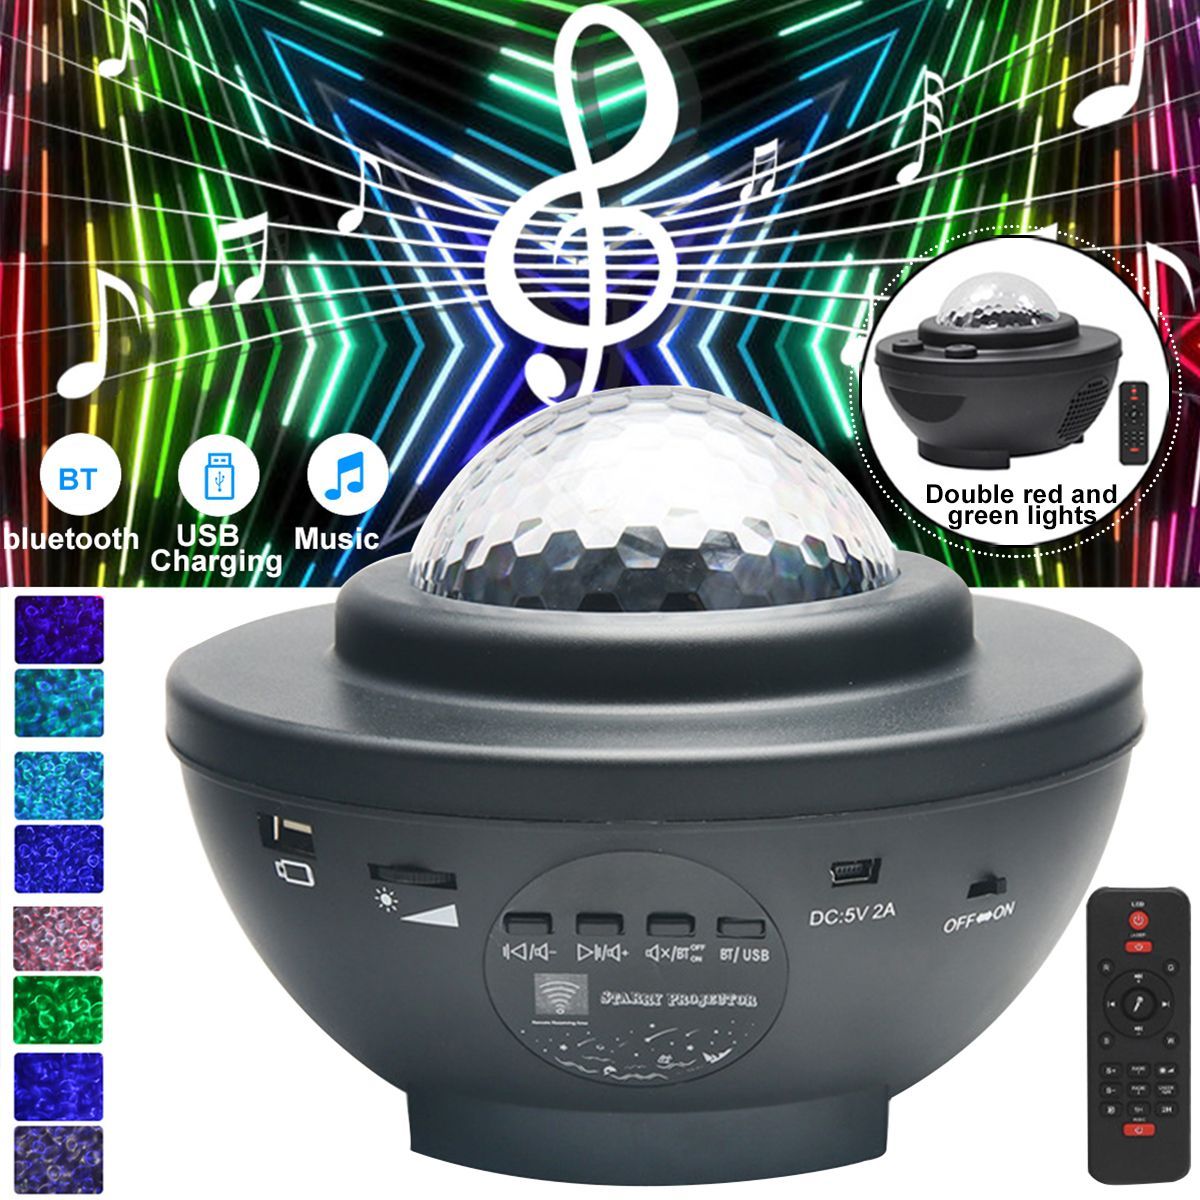 LED-Galaxy-Starry-Night-Light-Projector-Ocean-Star-Sky-Party-Speaker-Lamp-Remote-1726599